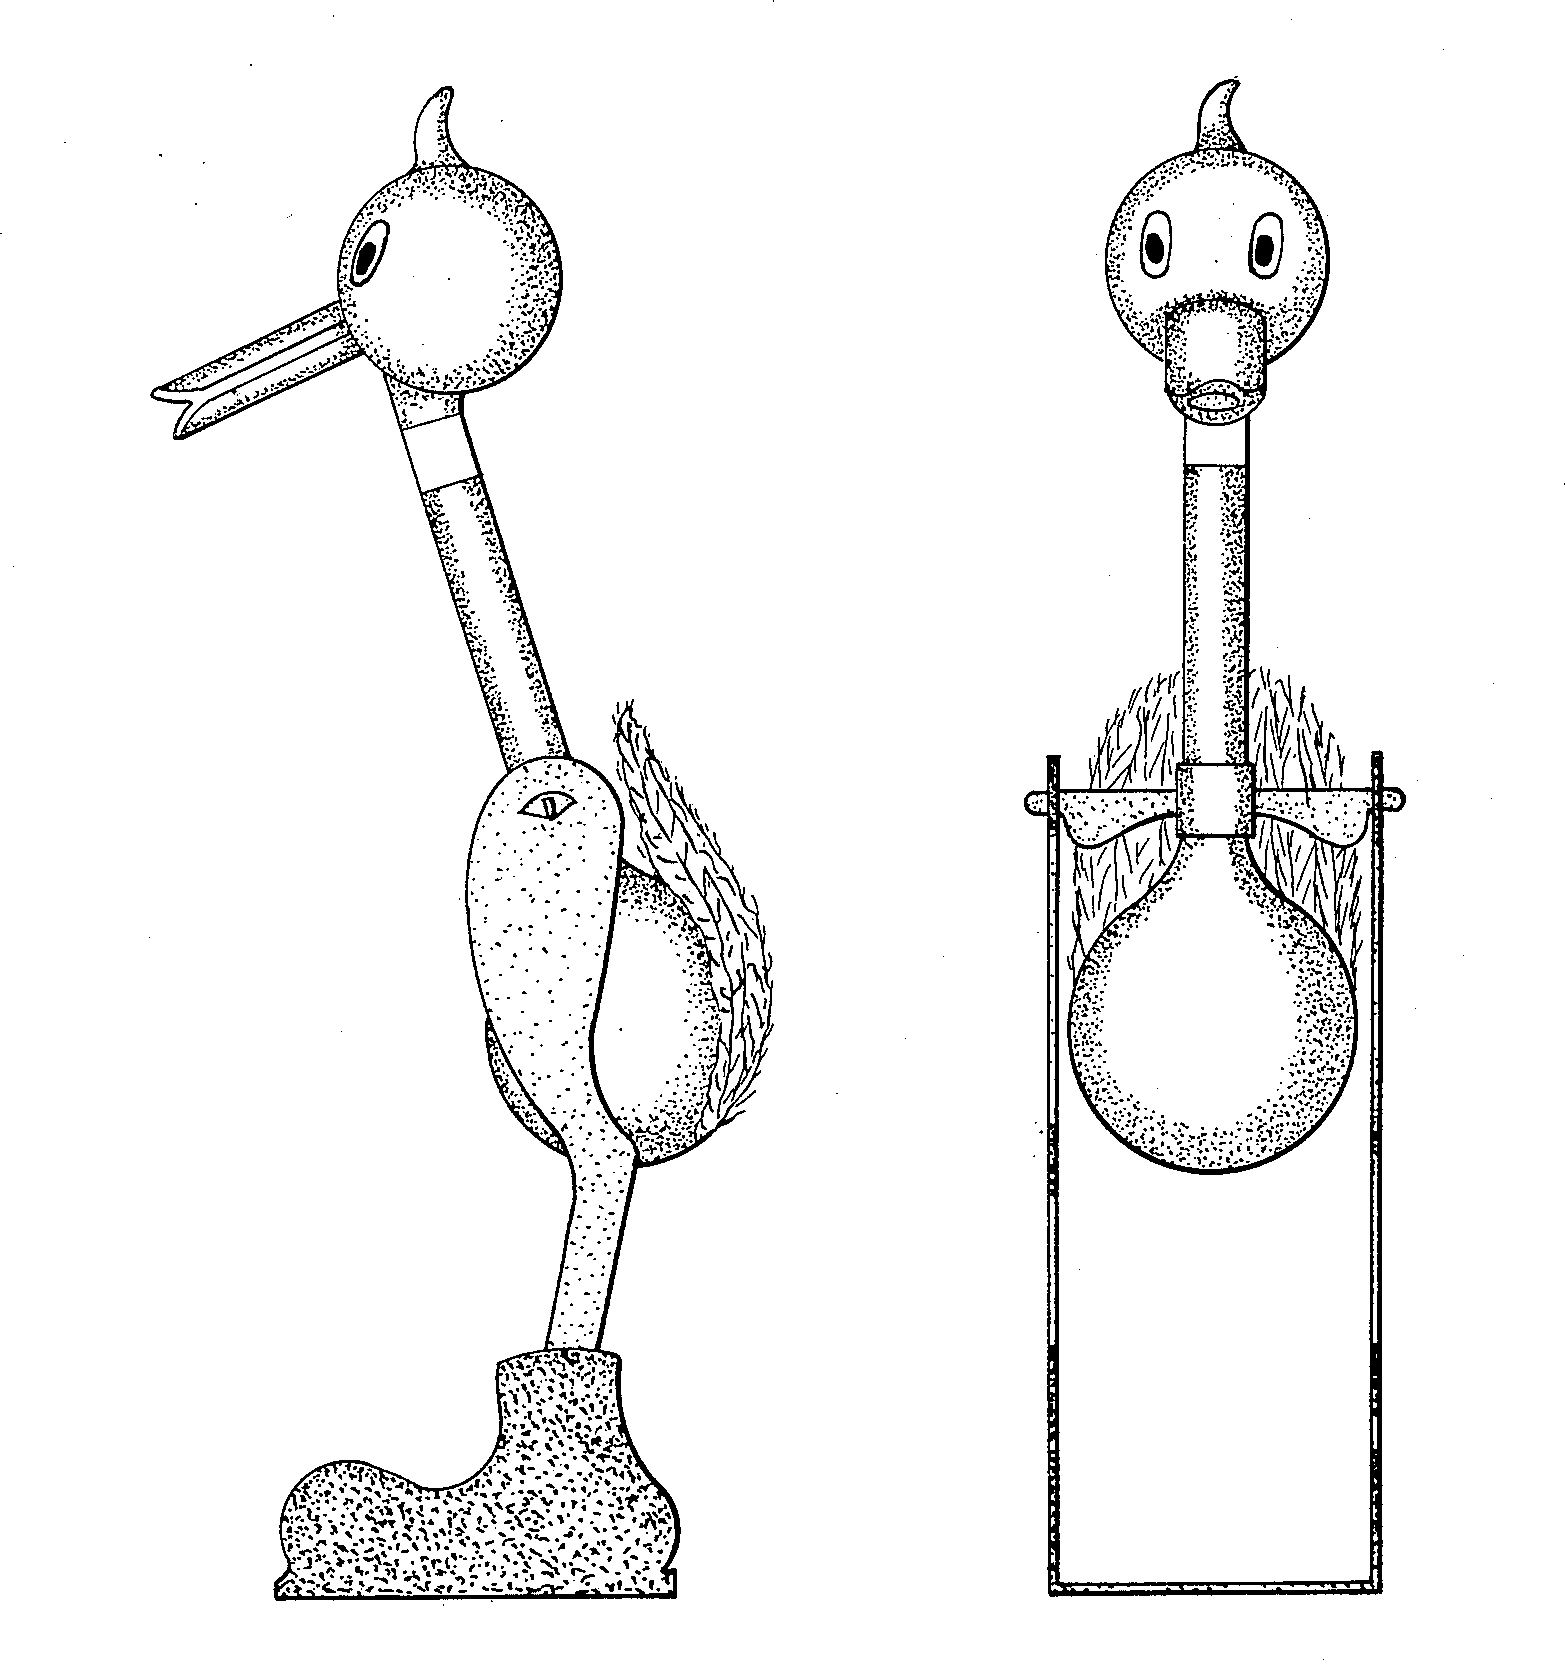 https://upload.wikimedia.org/wikipedia/commons/a/a4/Drinking_Bird_Patent_D0146744_crop.png